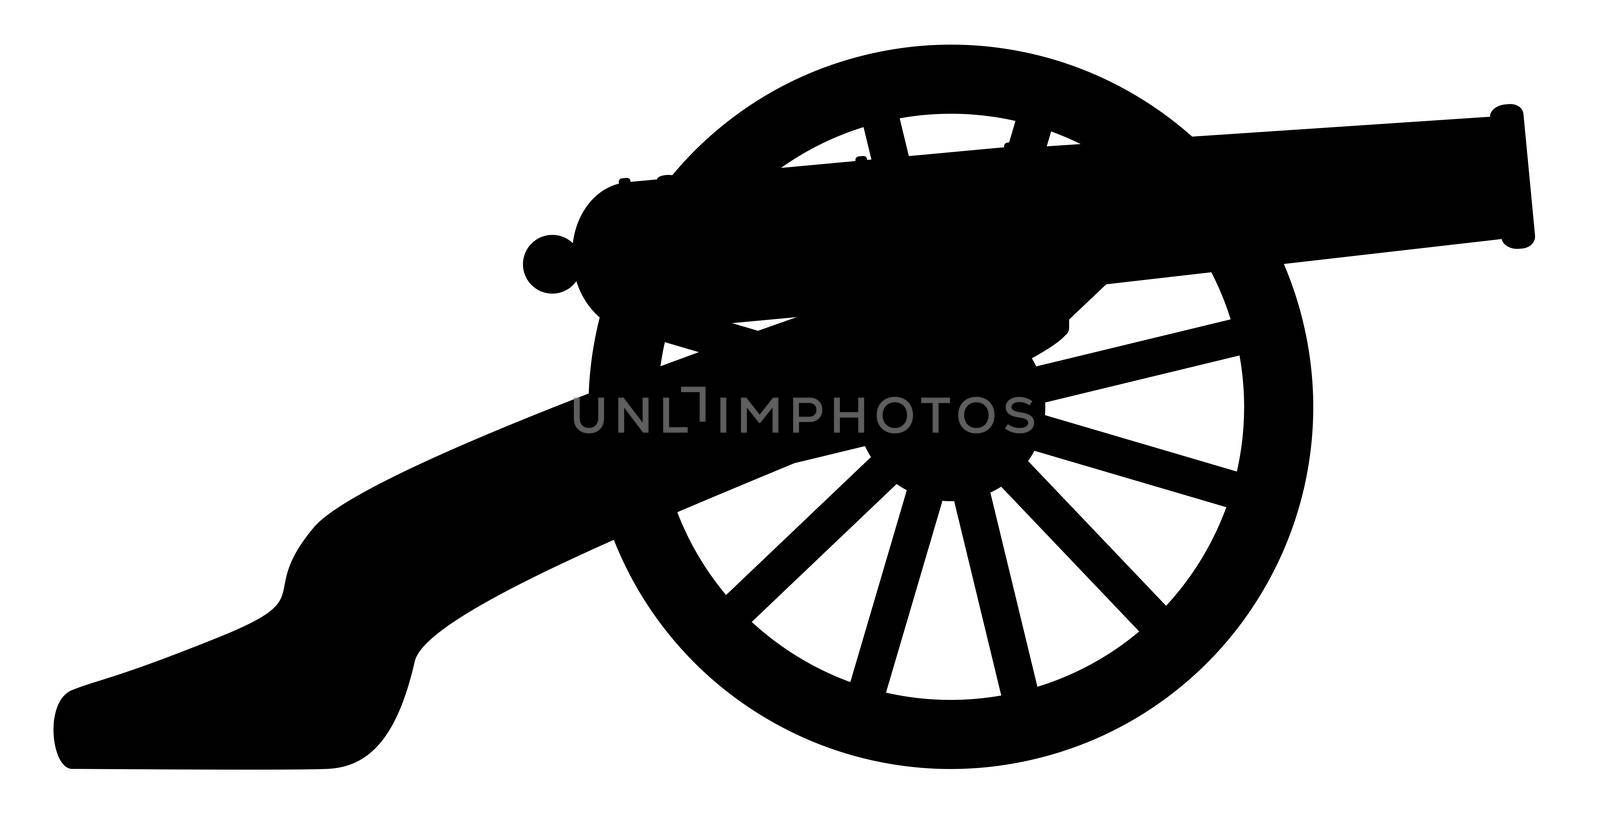 Typical American civil war cannon gun in silhouette isolated on a white background